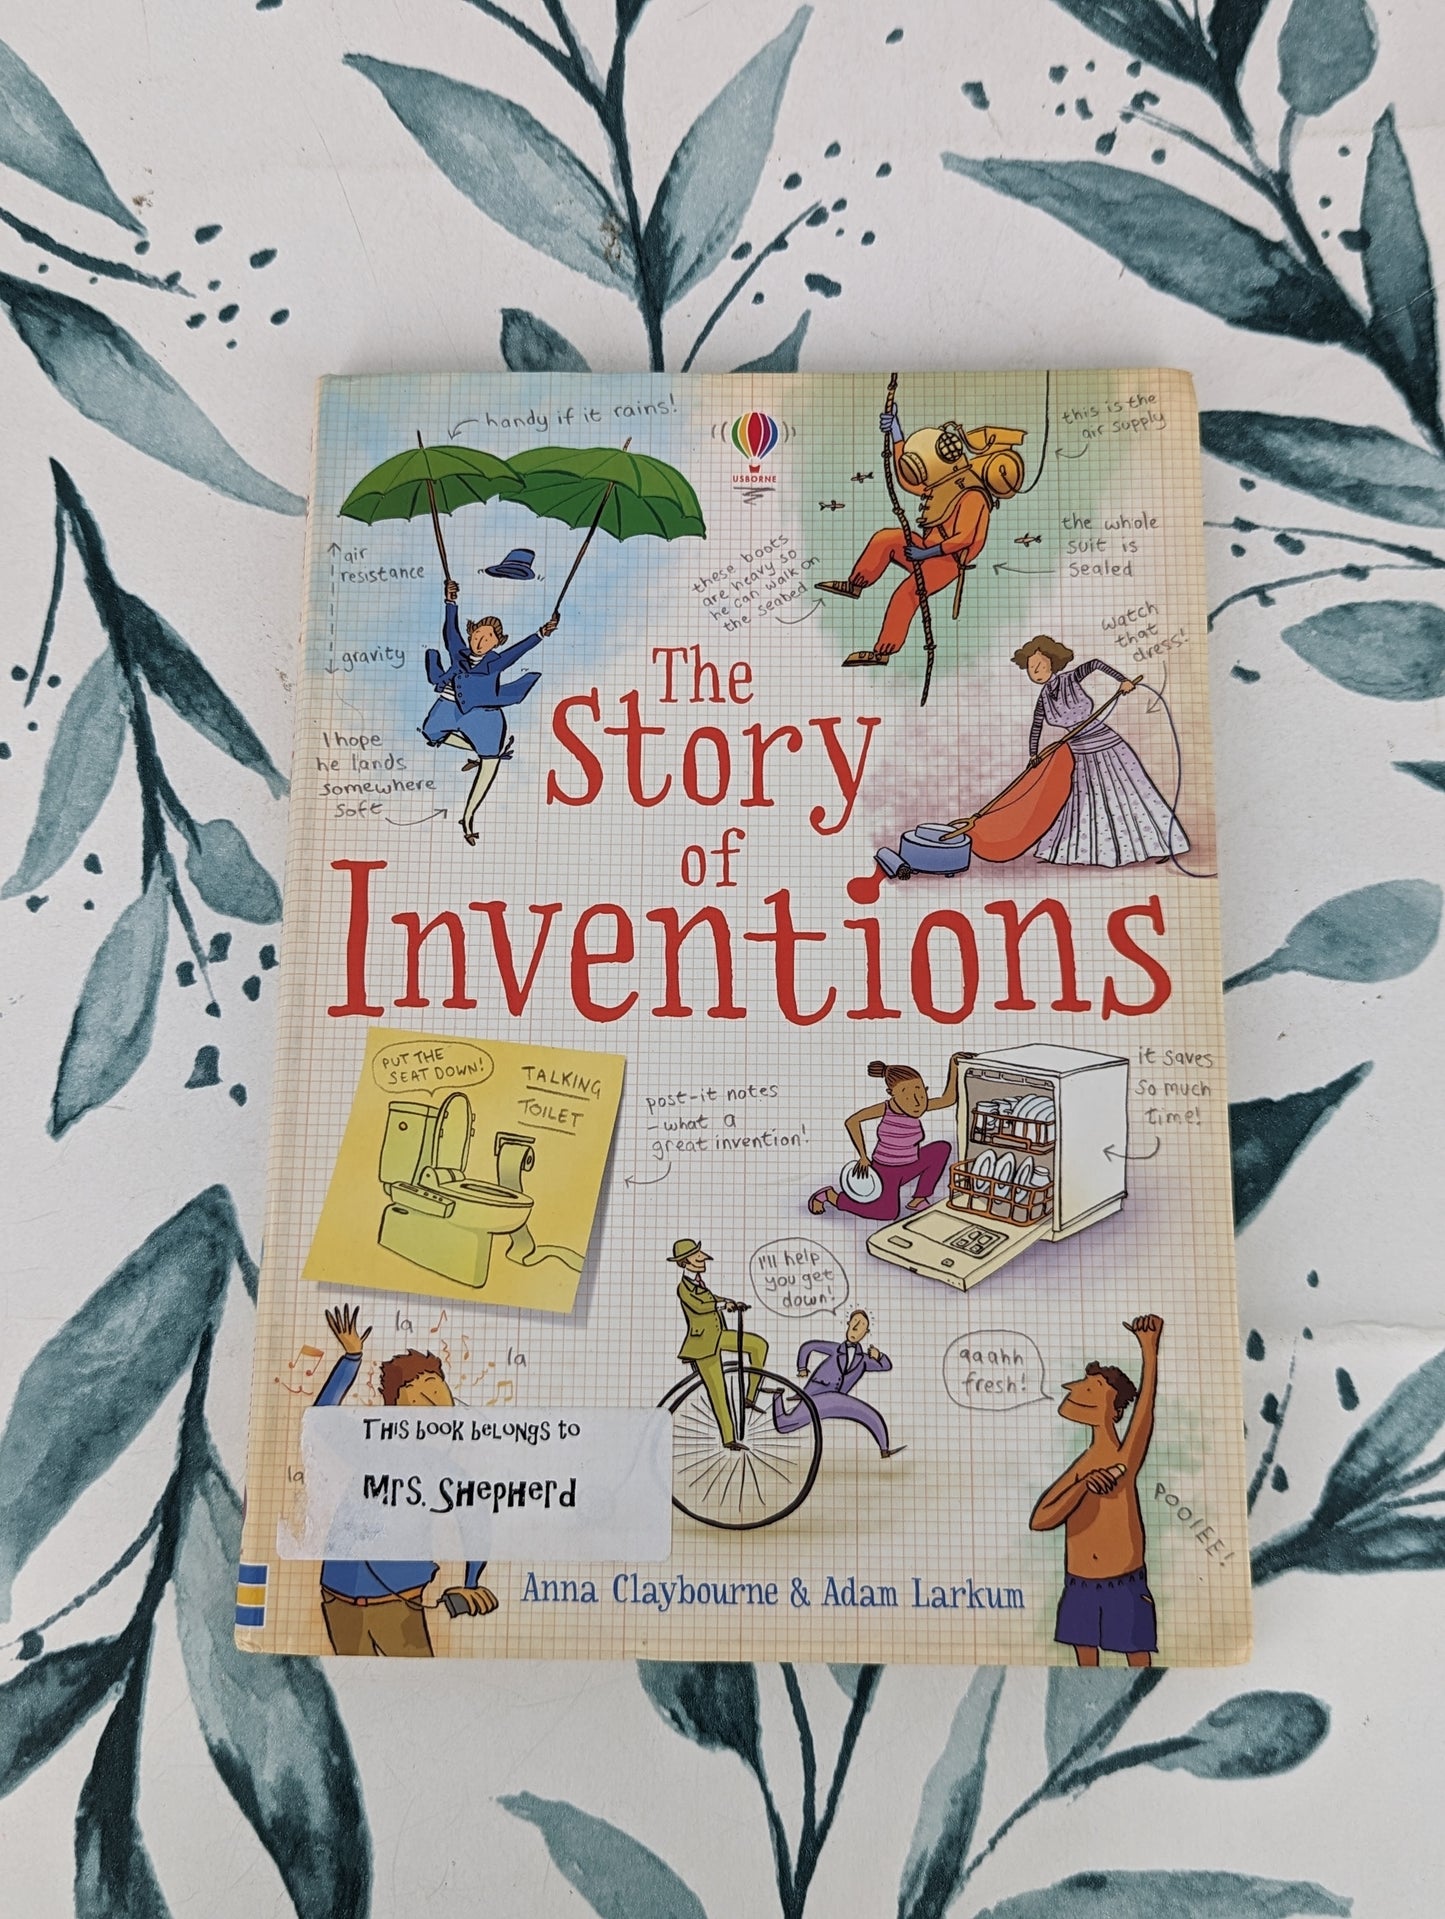 Usborne's The Story of Inventions